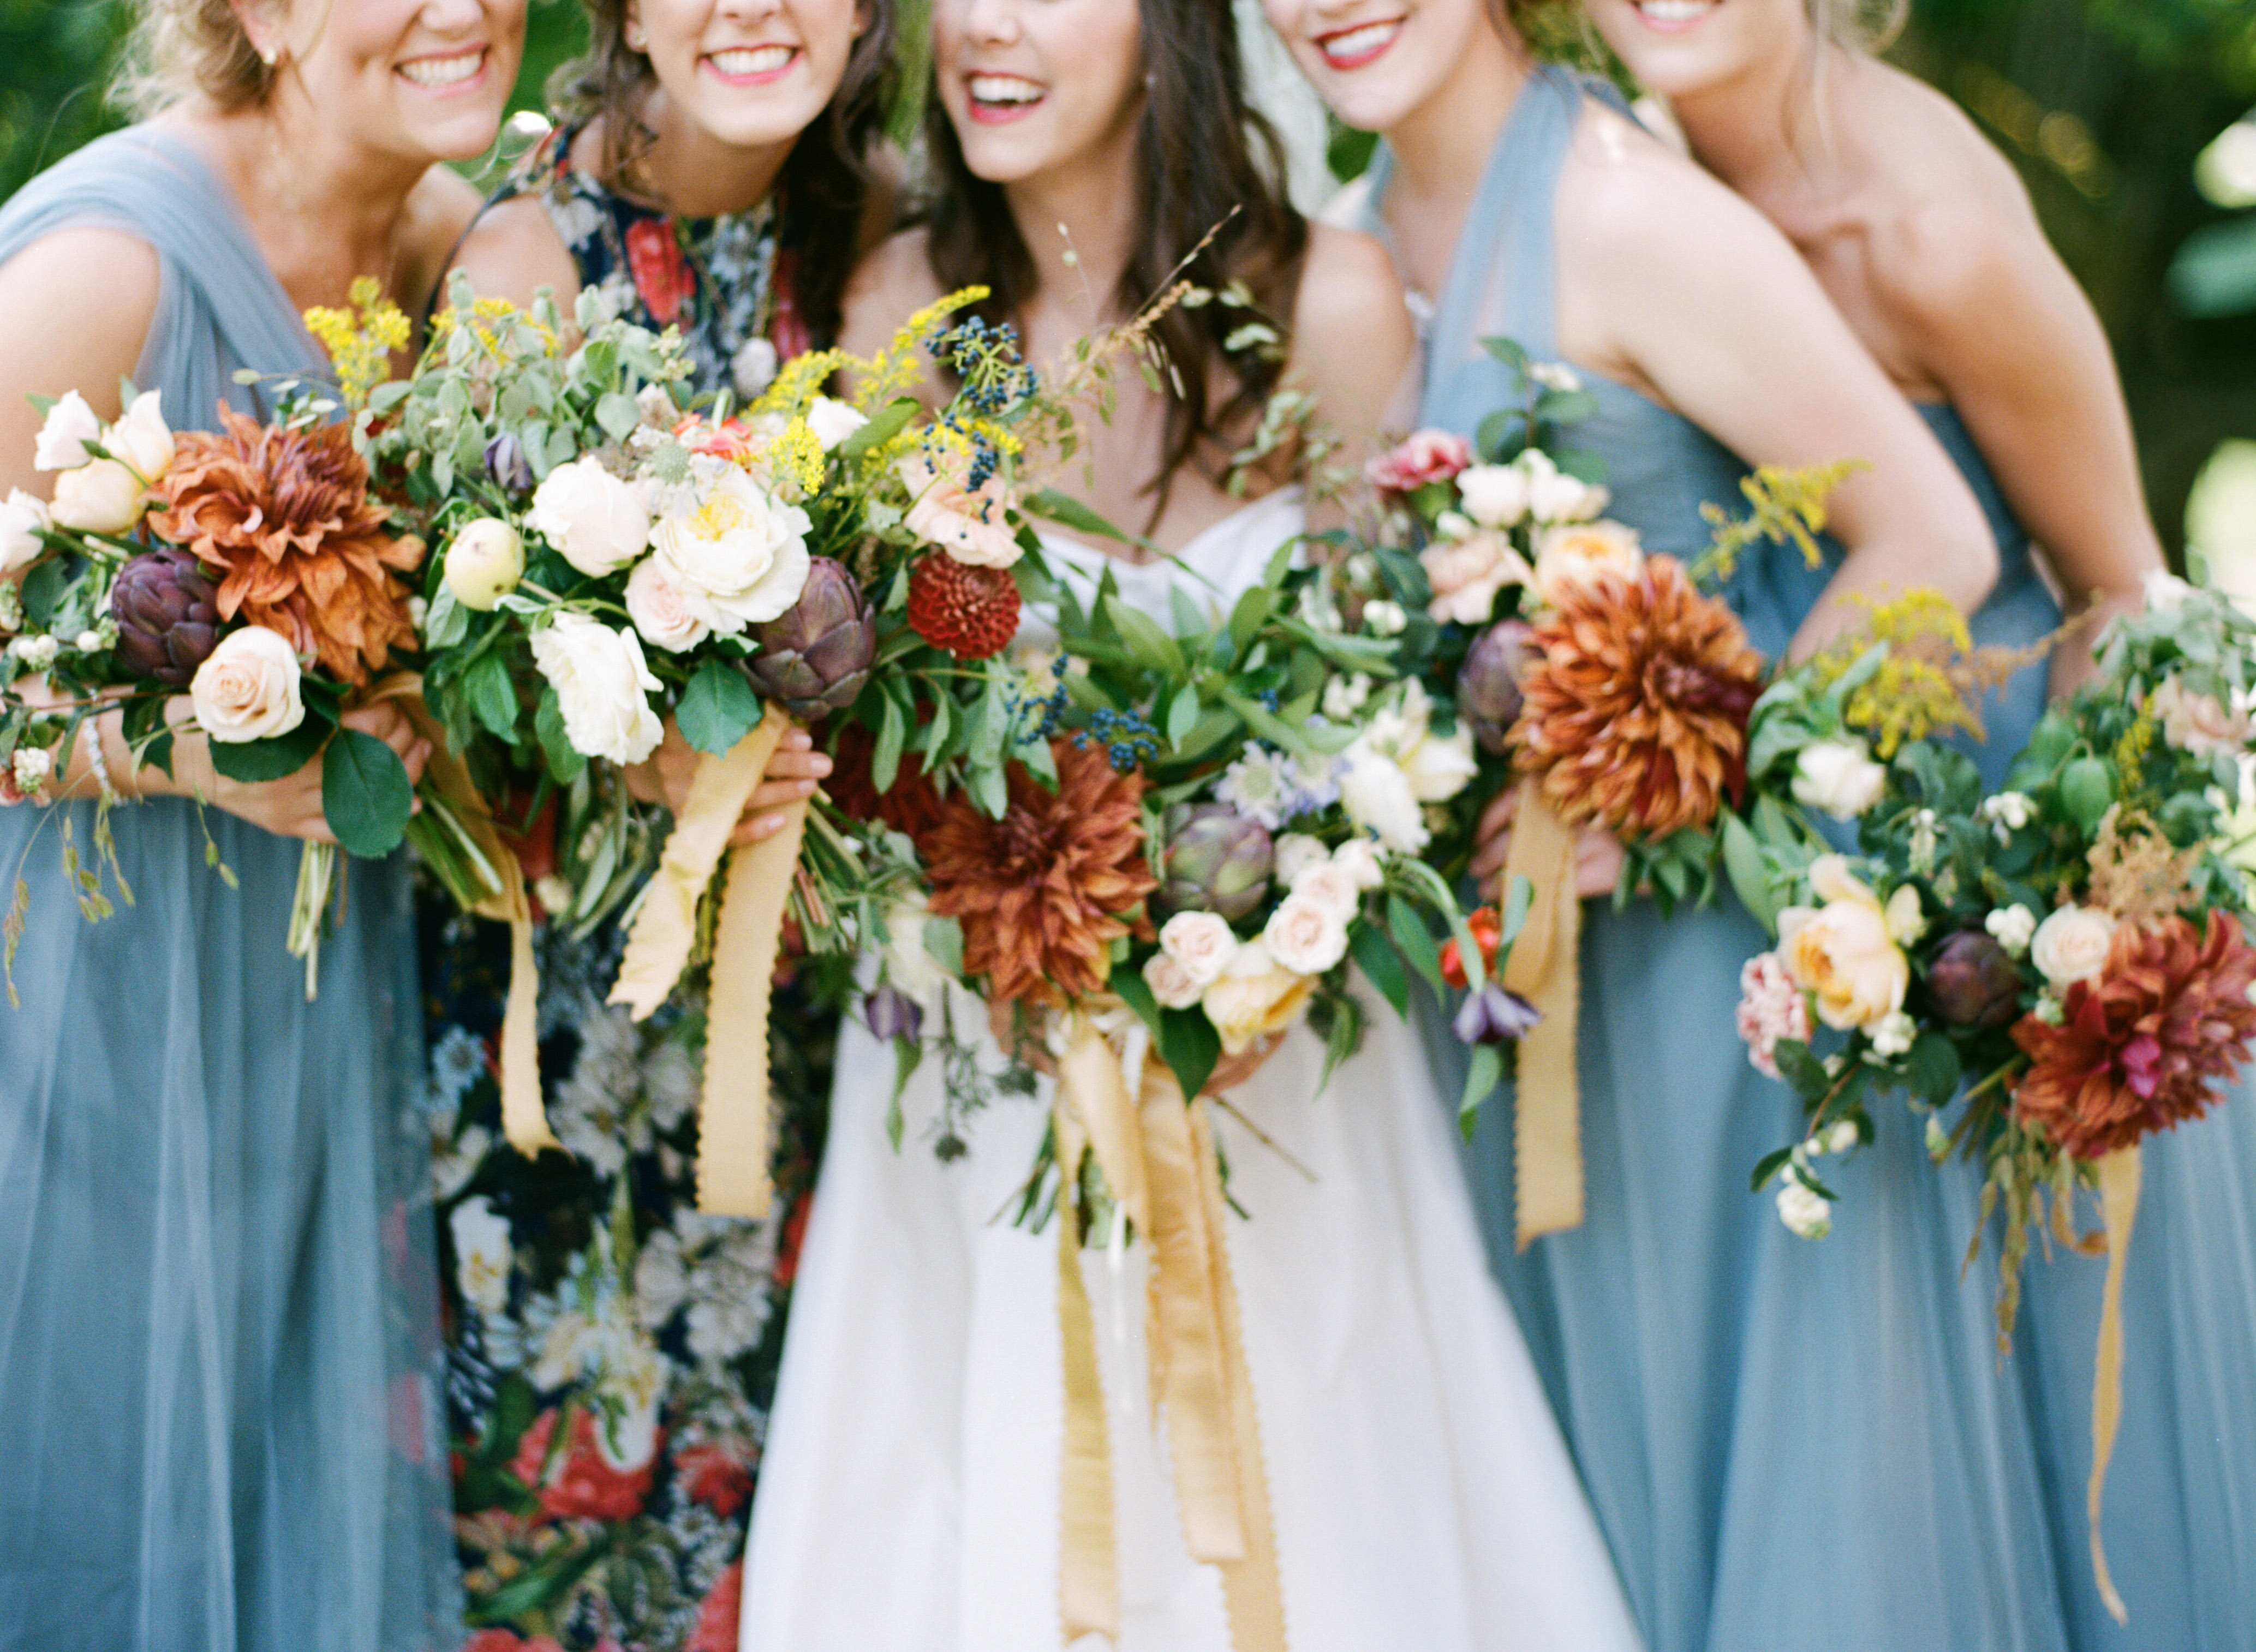 Dusty Blue and Amber Weddings | The Day's Design | Cory Weber Photography